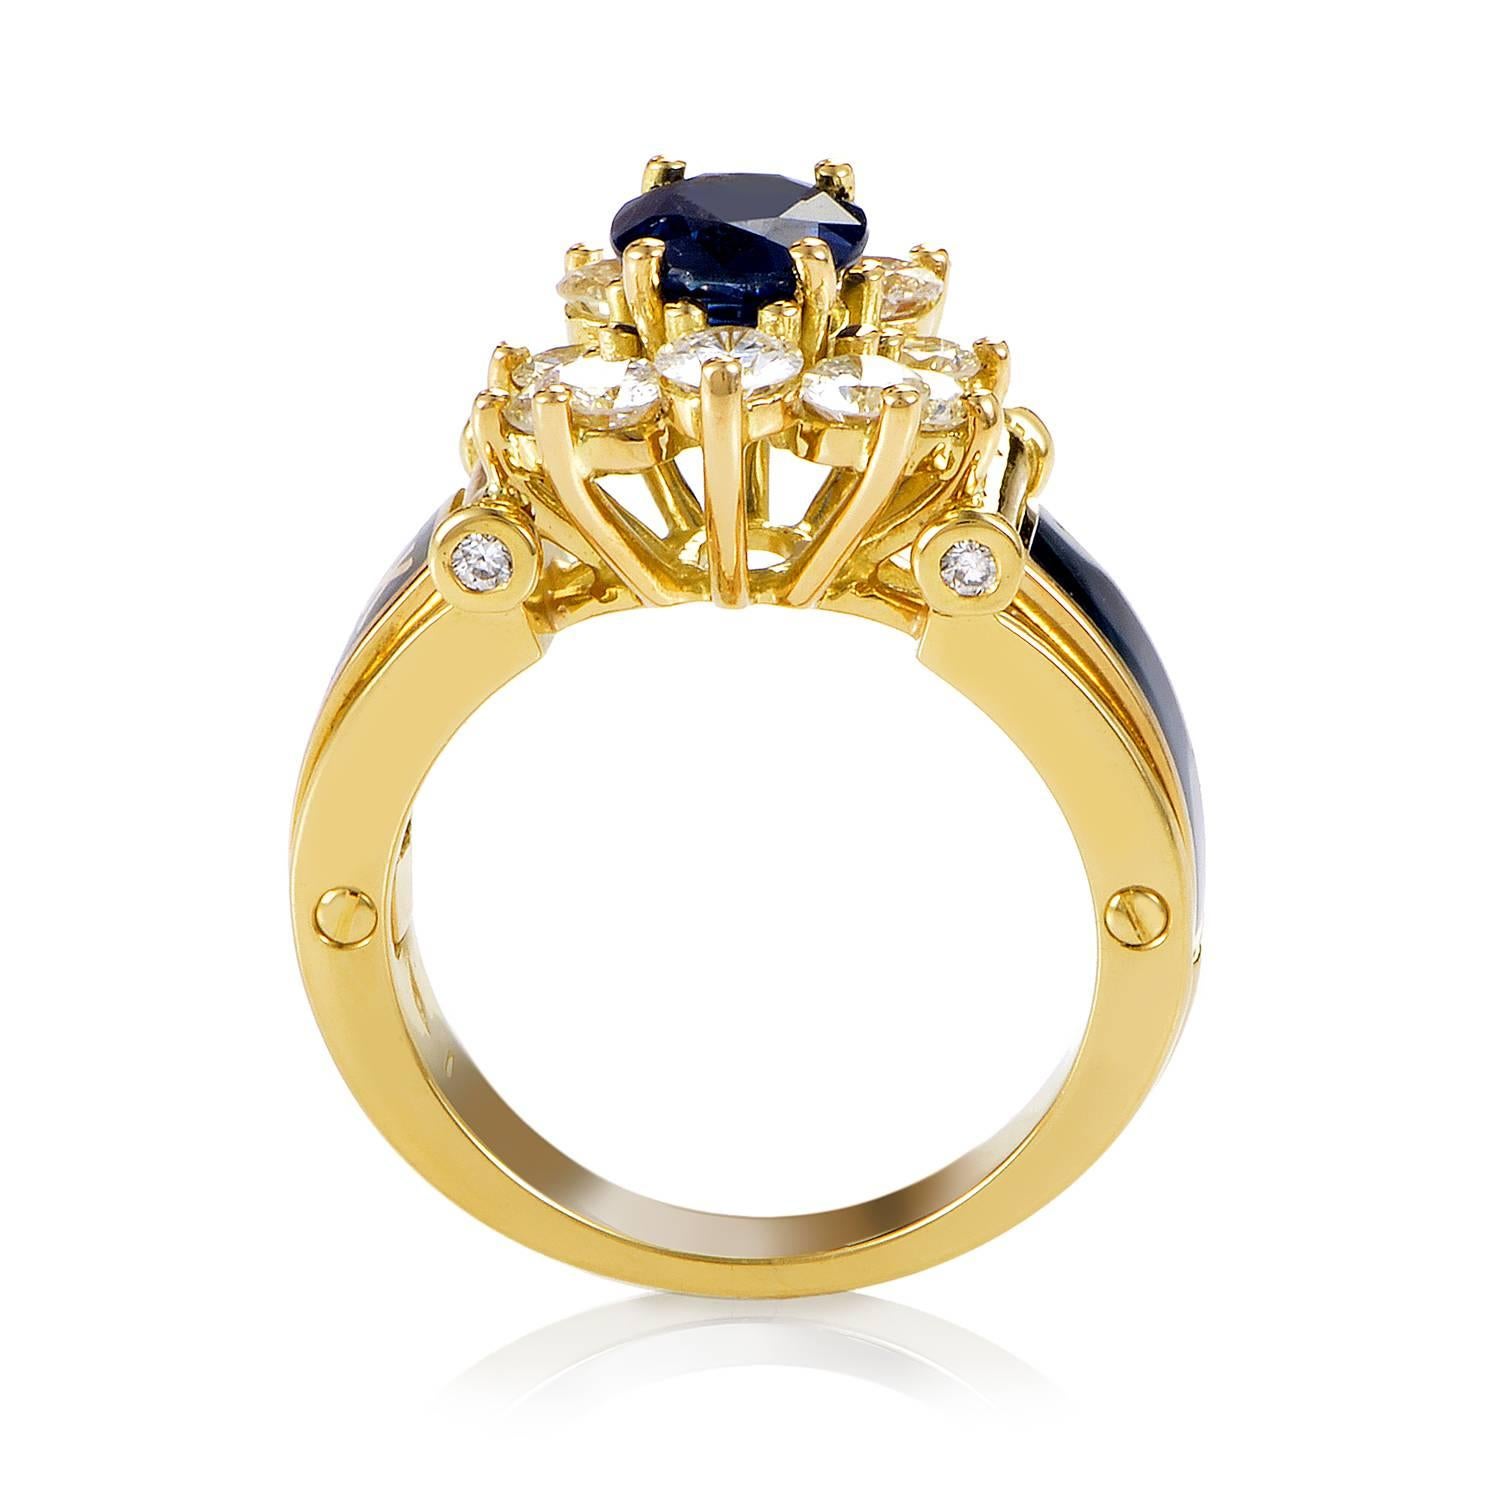 Creating a fantastic pedestal worthy of the astonishing sapphire weighing 2.00 carats nested gloriously on top, the gorgeous body of this majestic ring from Korloff is splendidly enameled to match the nuance of the gem, while sparkling diamonds